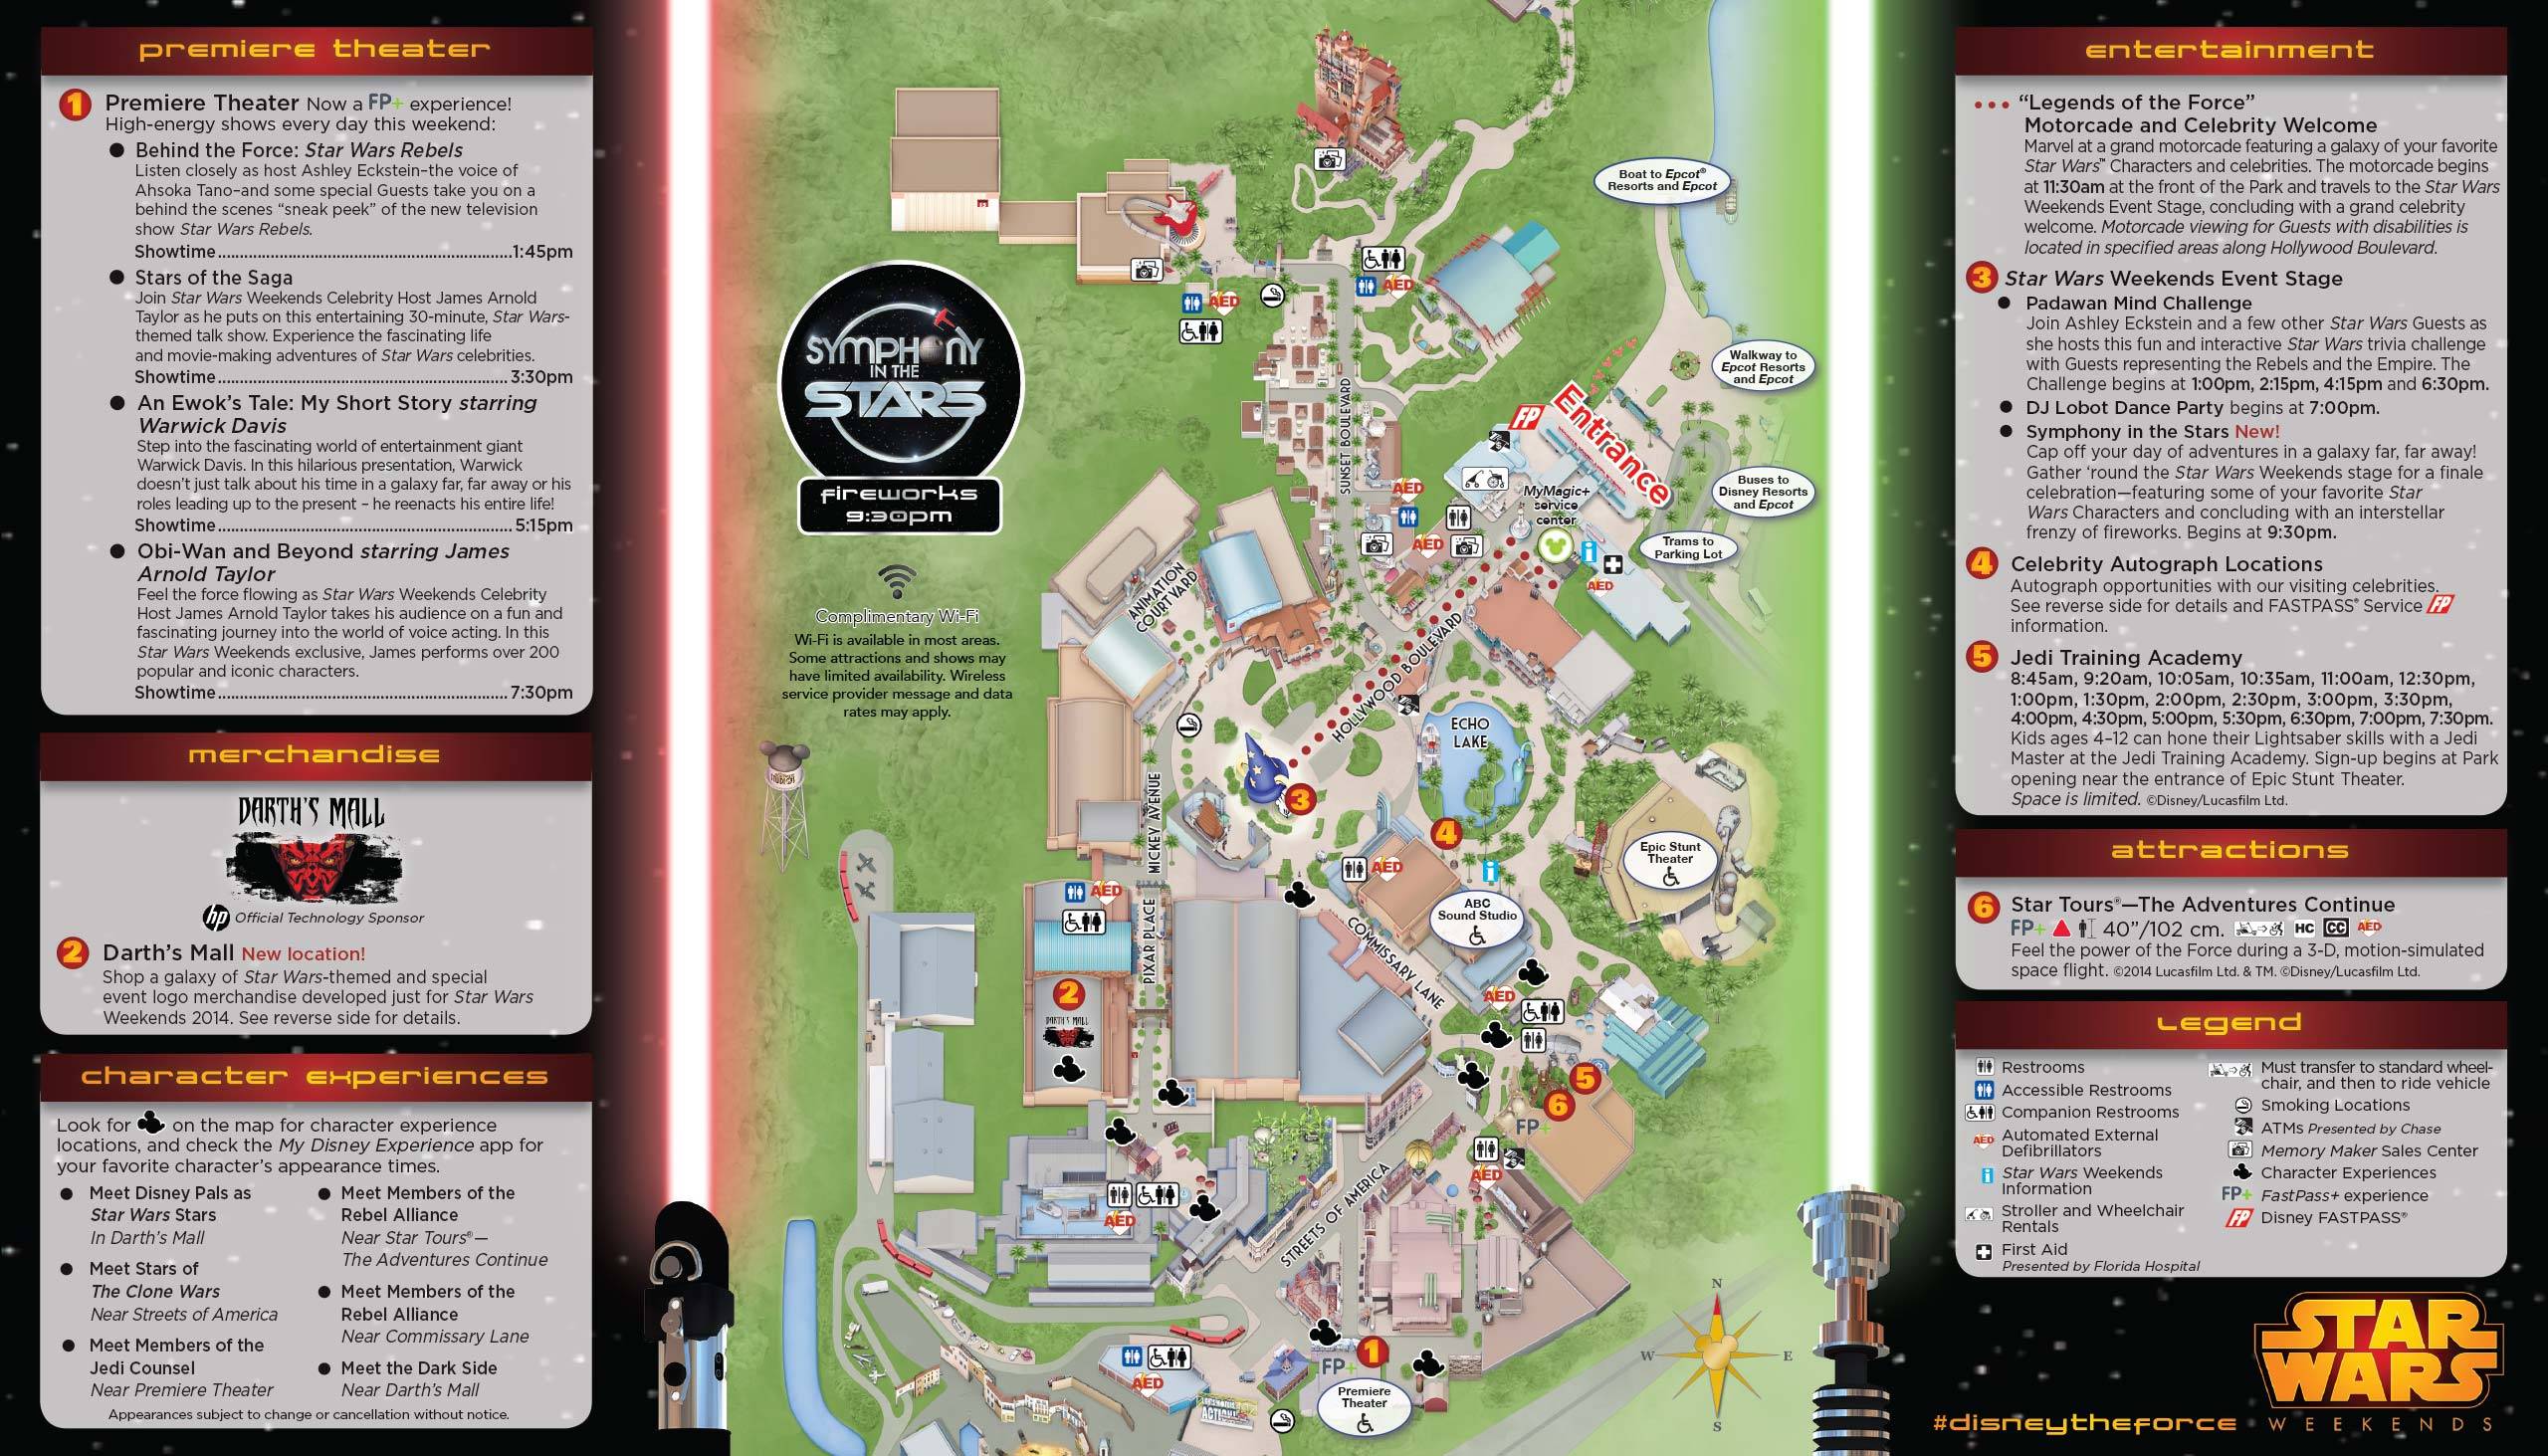 PHOTOS - Star Wars Weekends guide map for Weekend 2